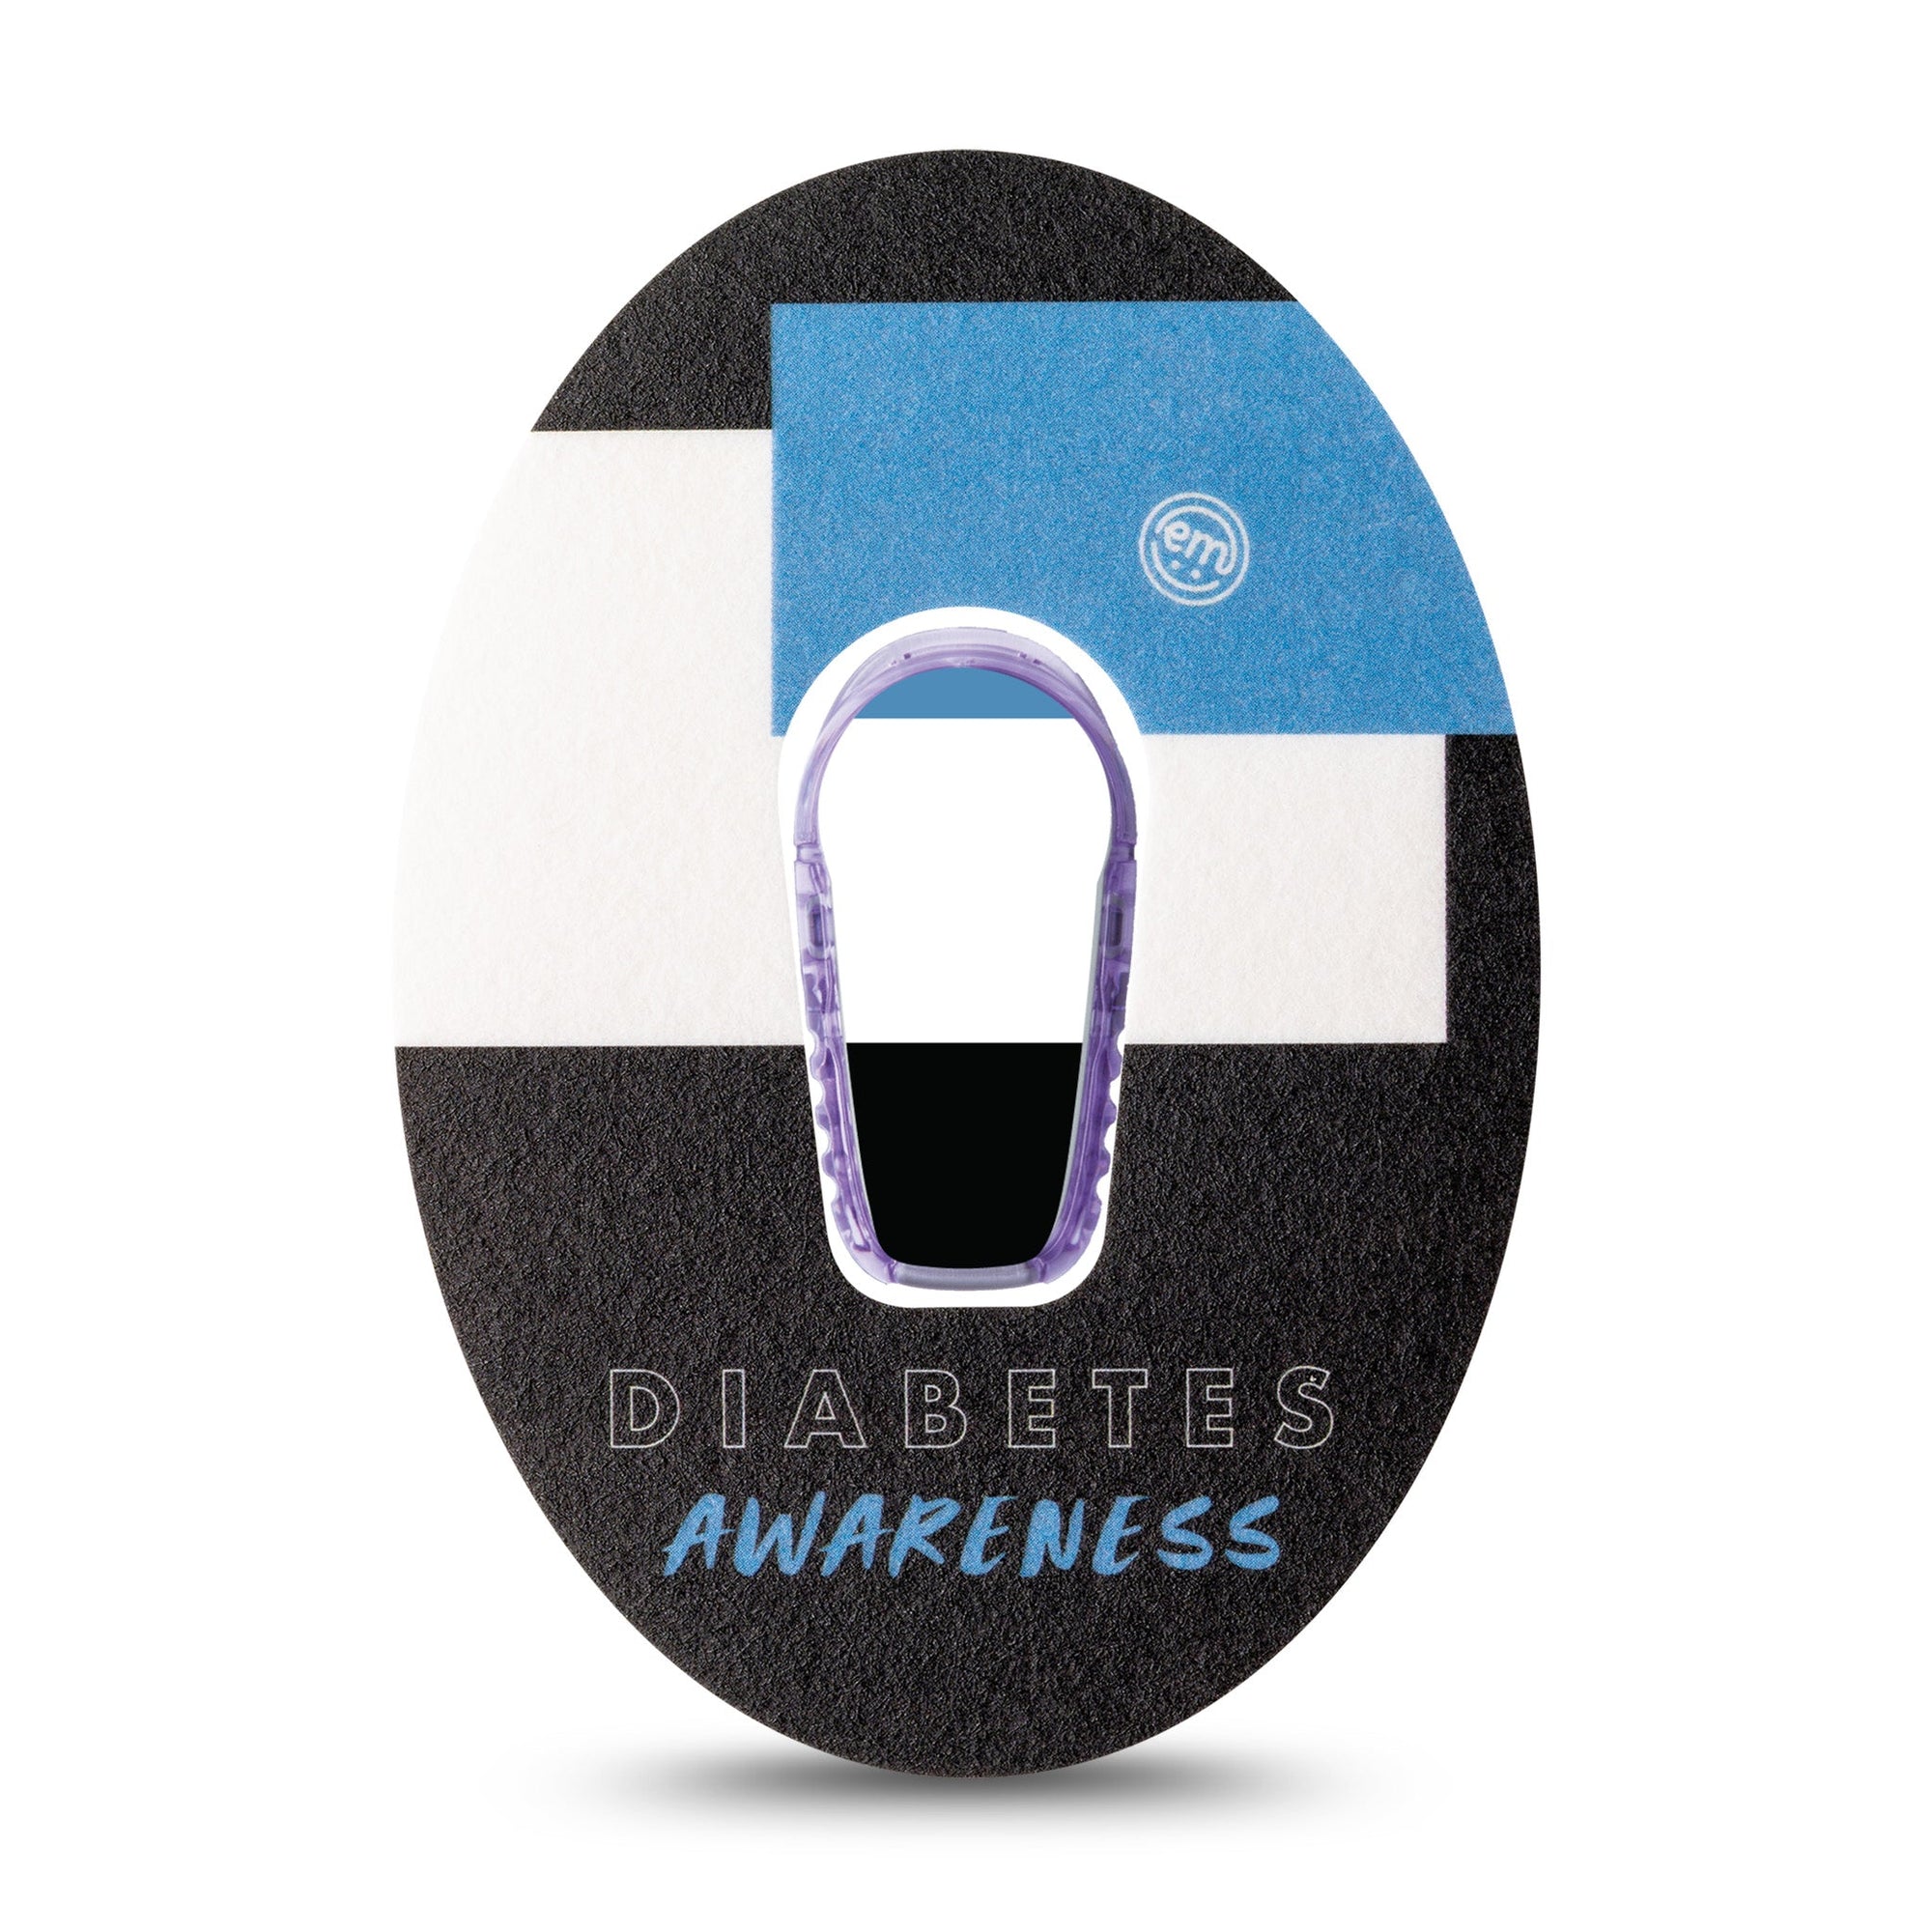 ExpressionMed Diabetes Awareness Dexcom G6 Transmitter Sticker and Tape, Insulin Support, CGM Vinyl Sticker and Tape Design